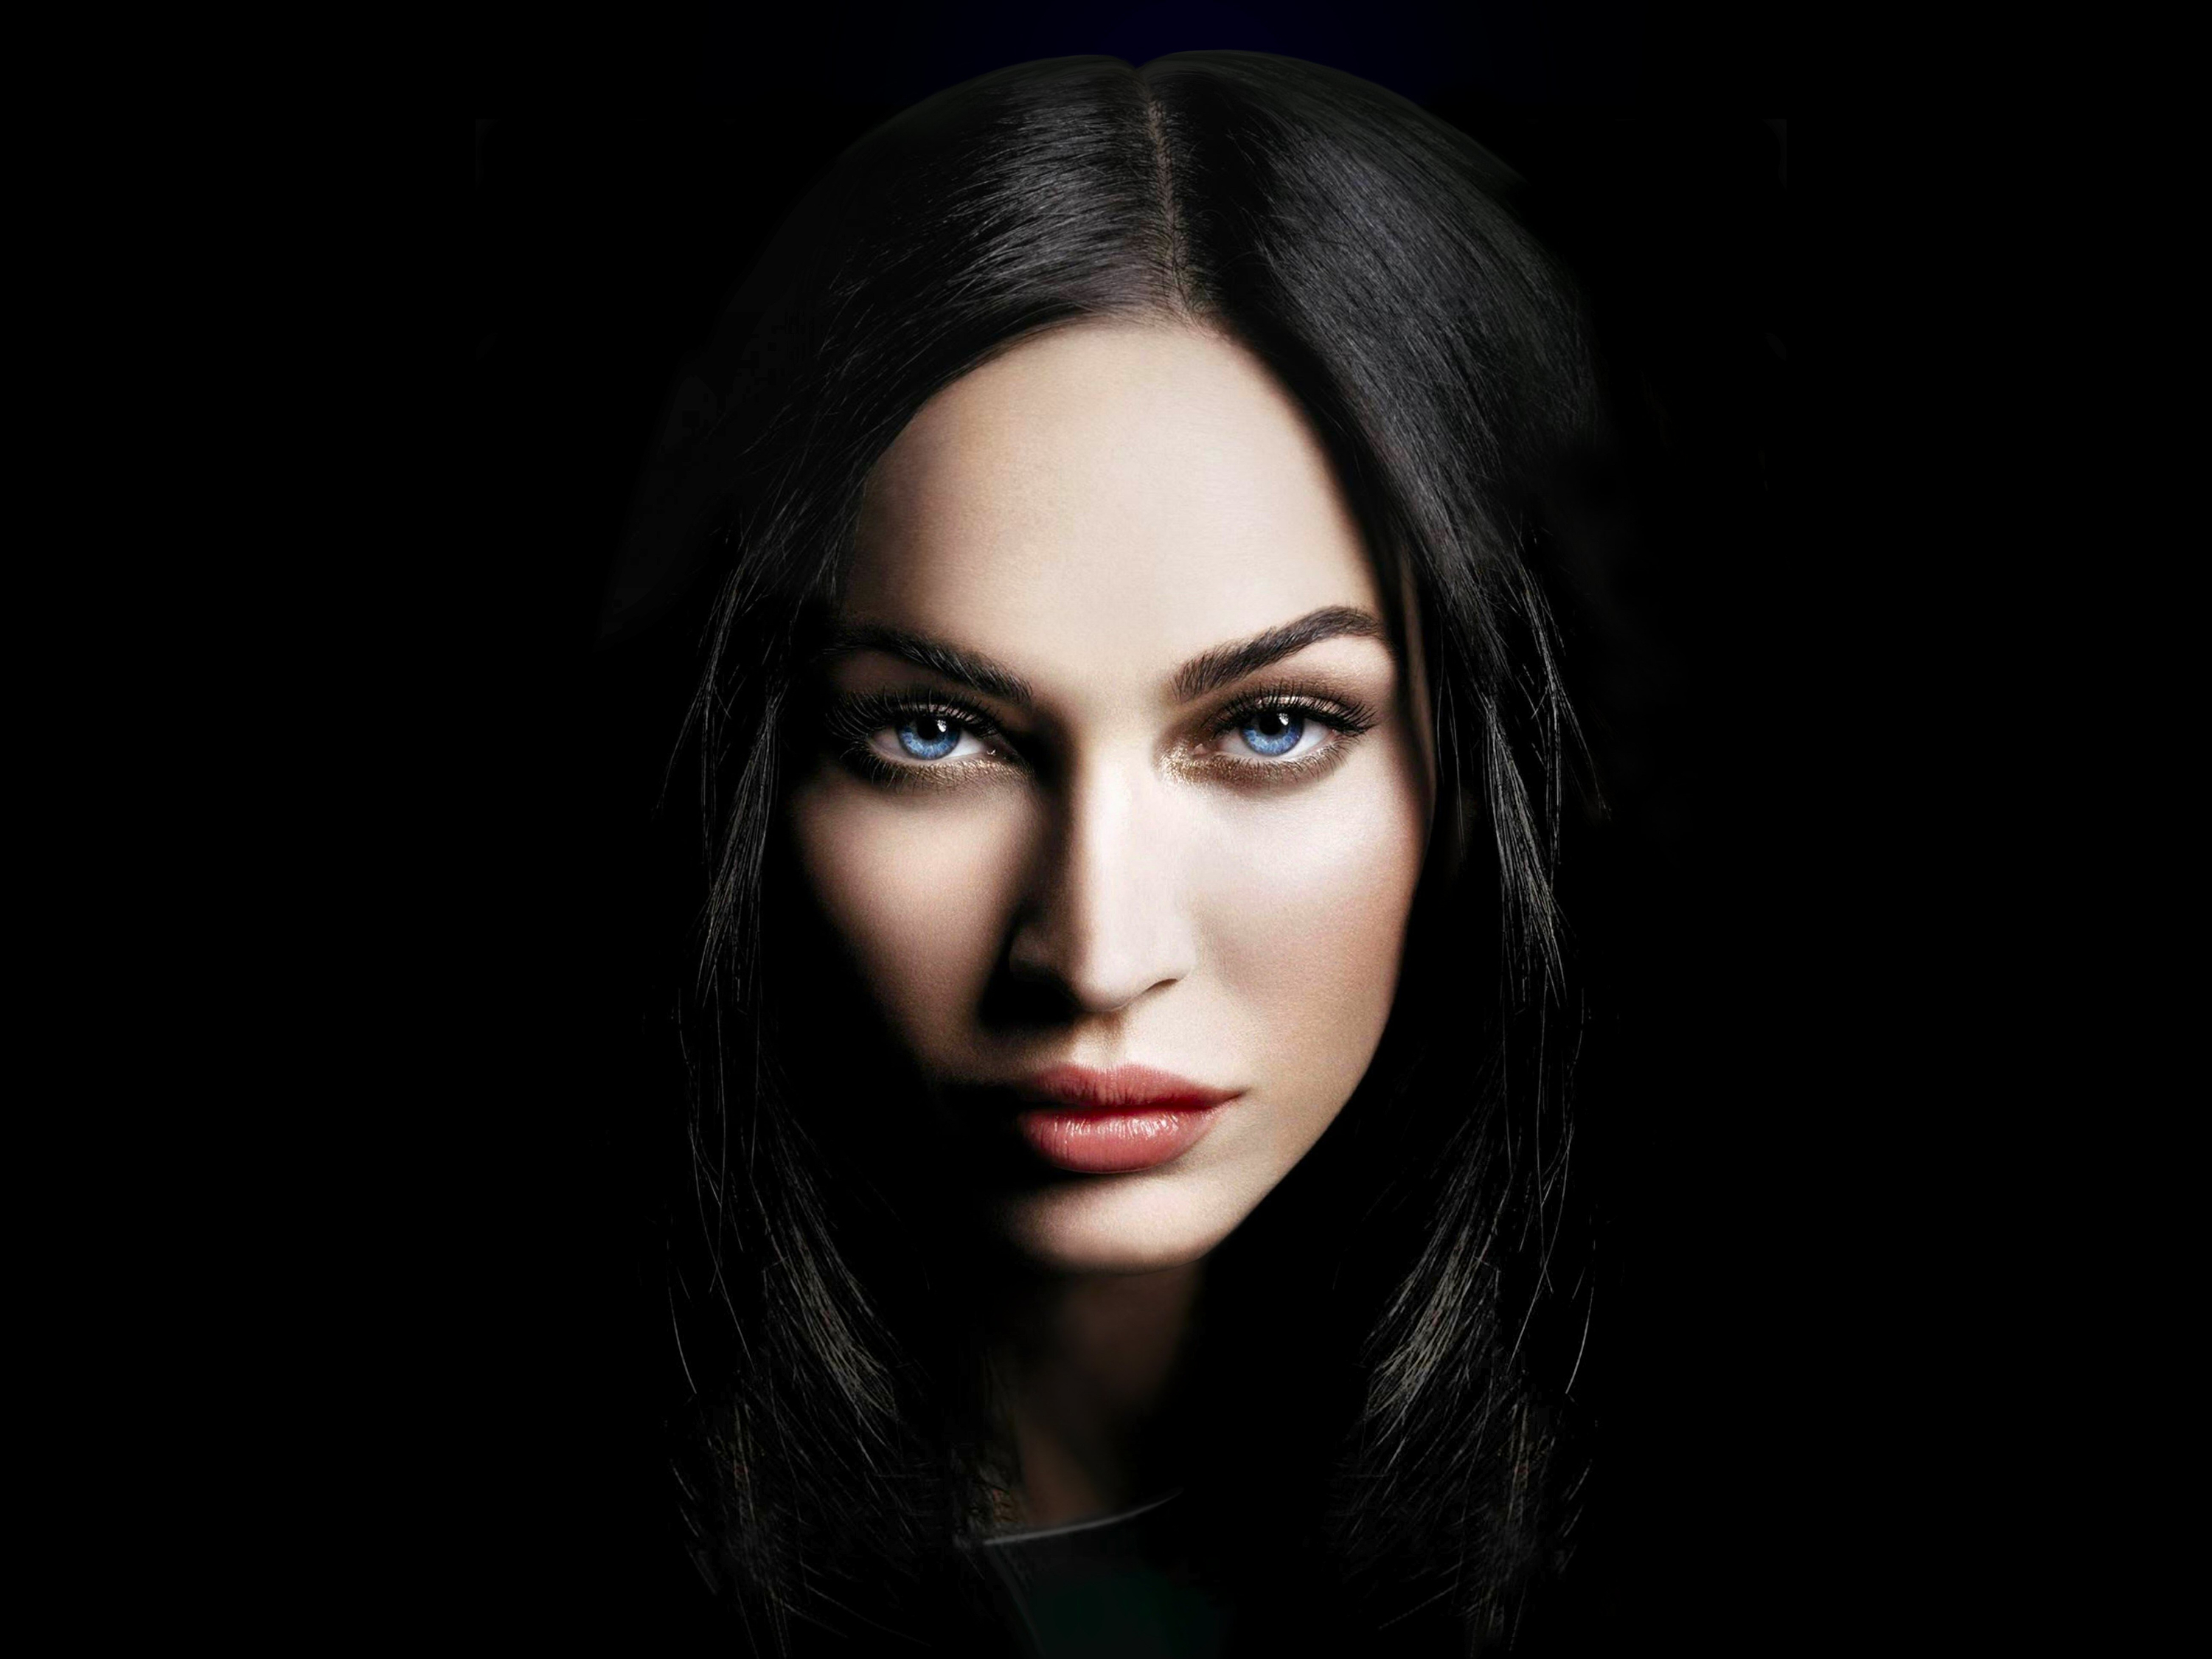 Megan Fox Beautiful Actress Eyes Wallpaper Hd Celebrities 4k Wallpapers Images And Background